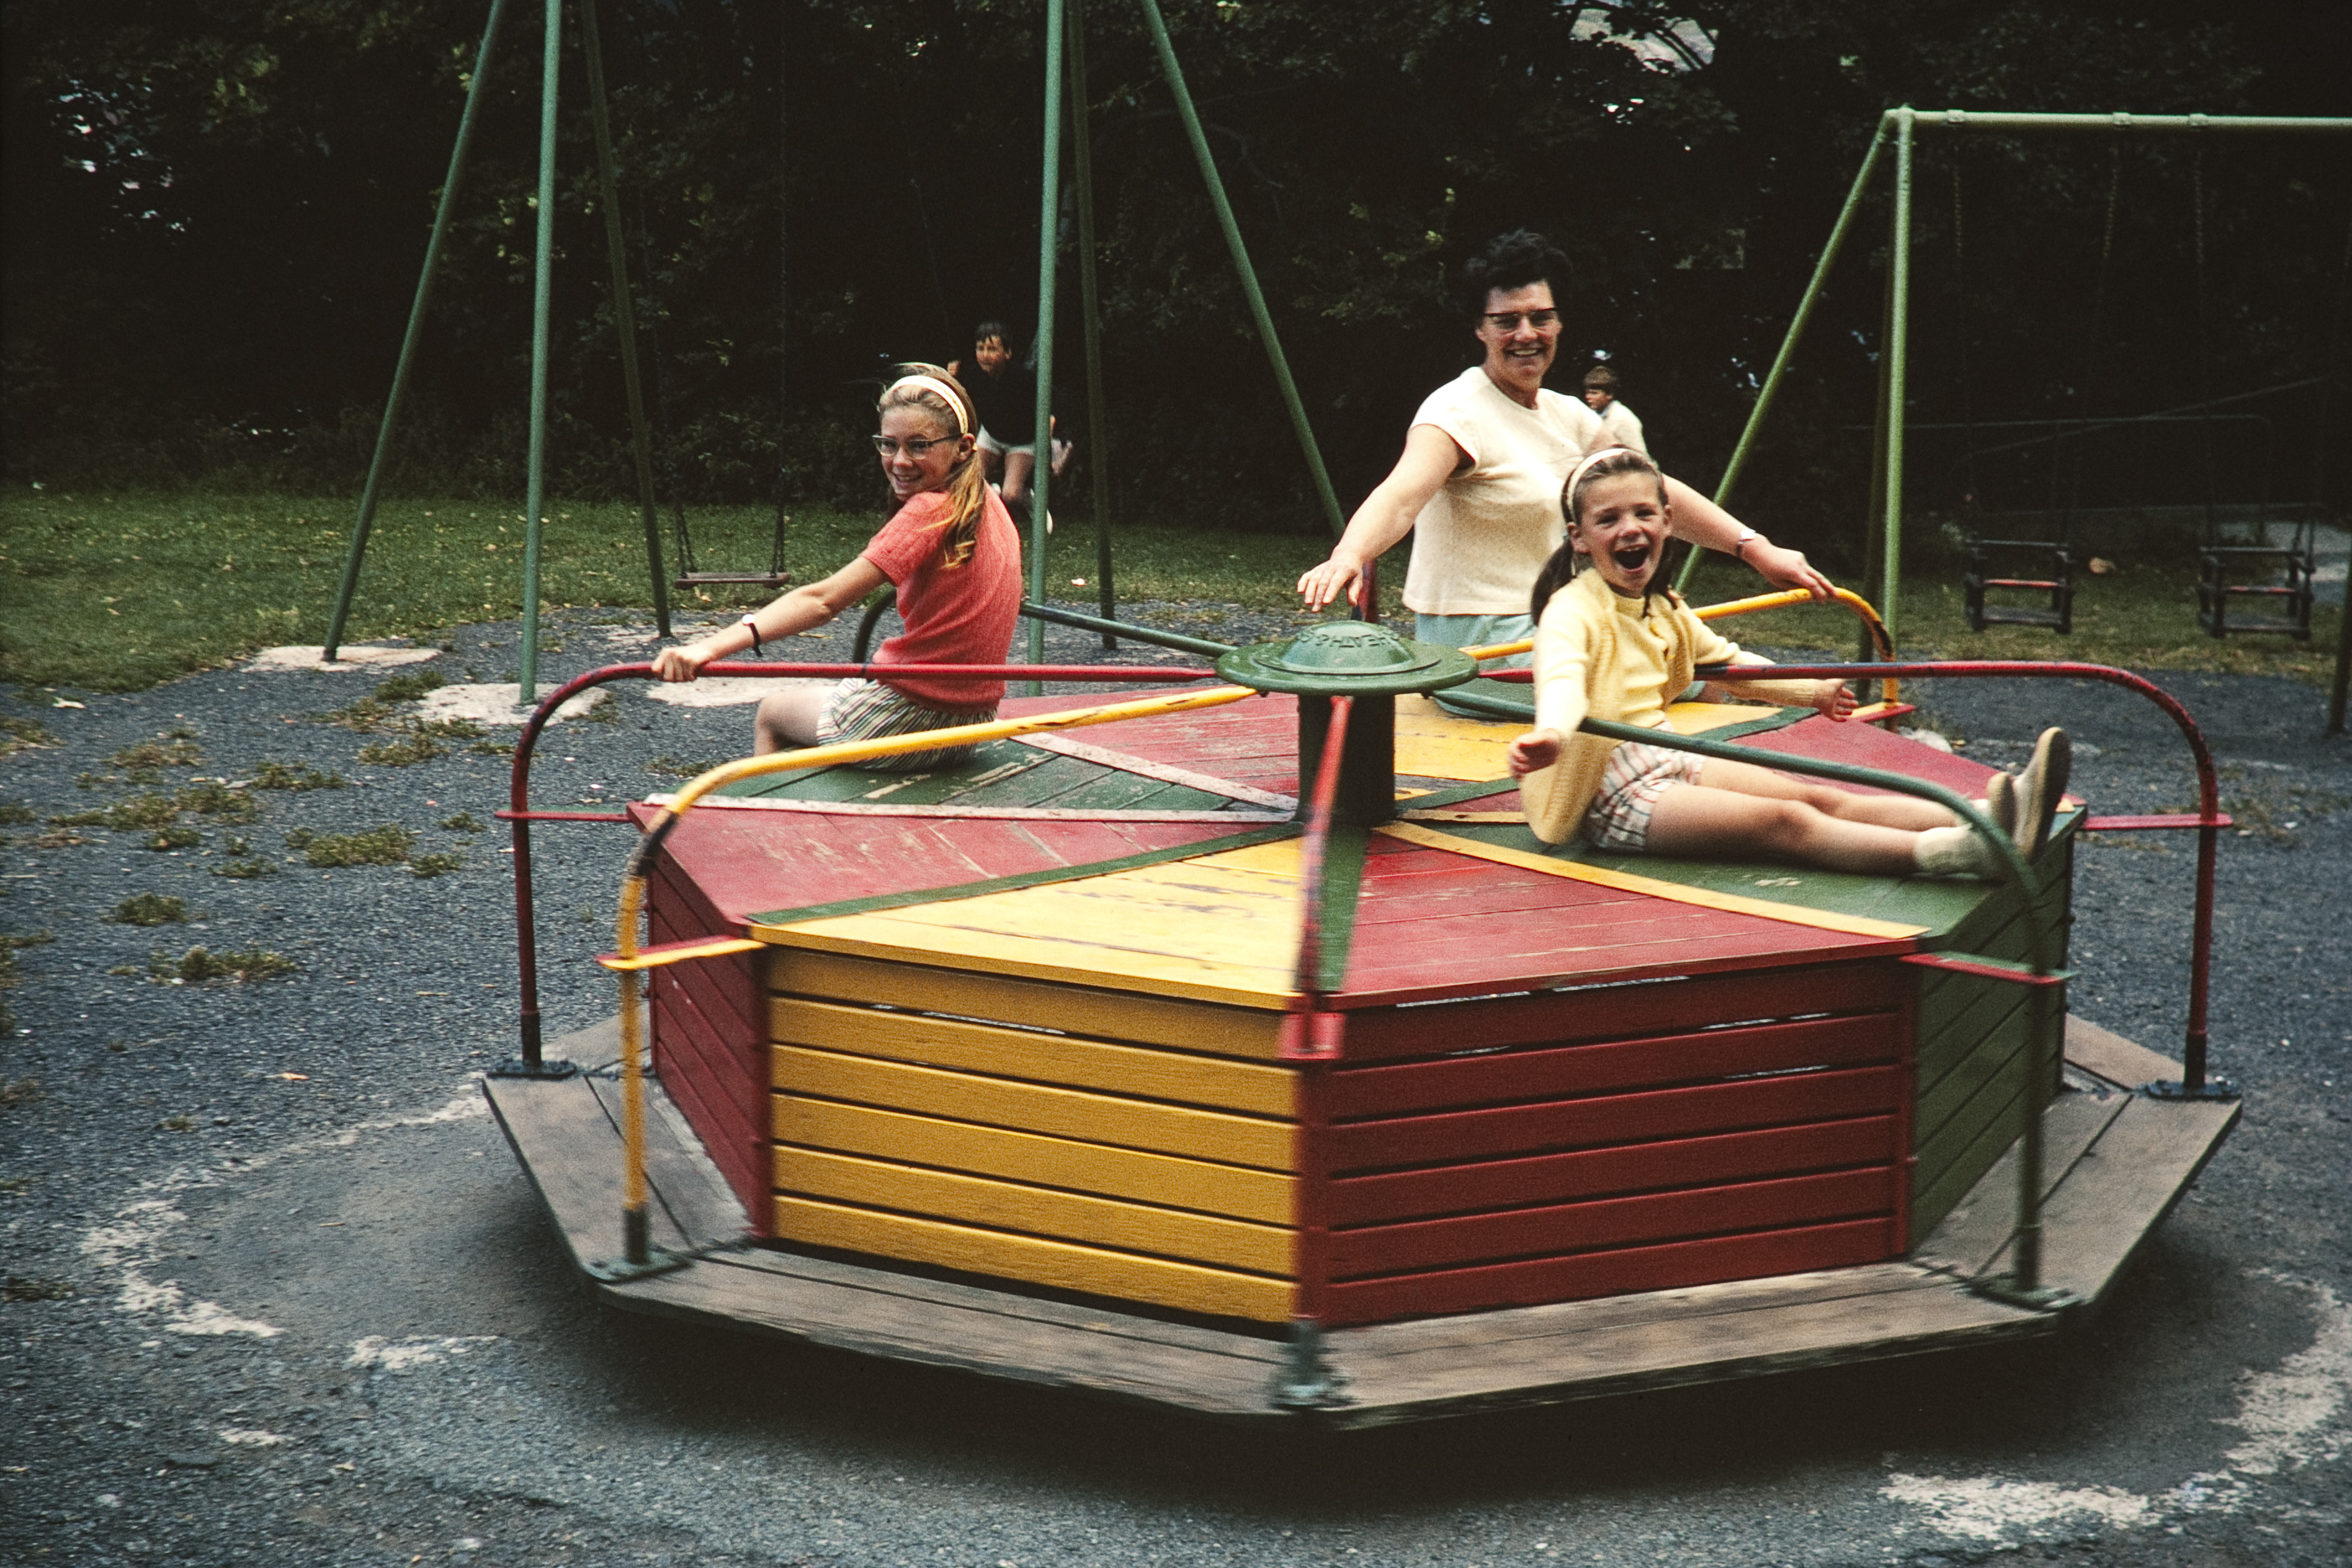 Adult and two children enjoy a merry-go-round at a playground, expressing joy